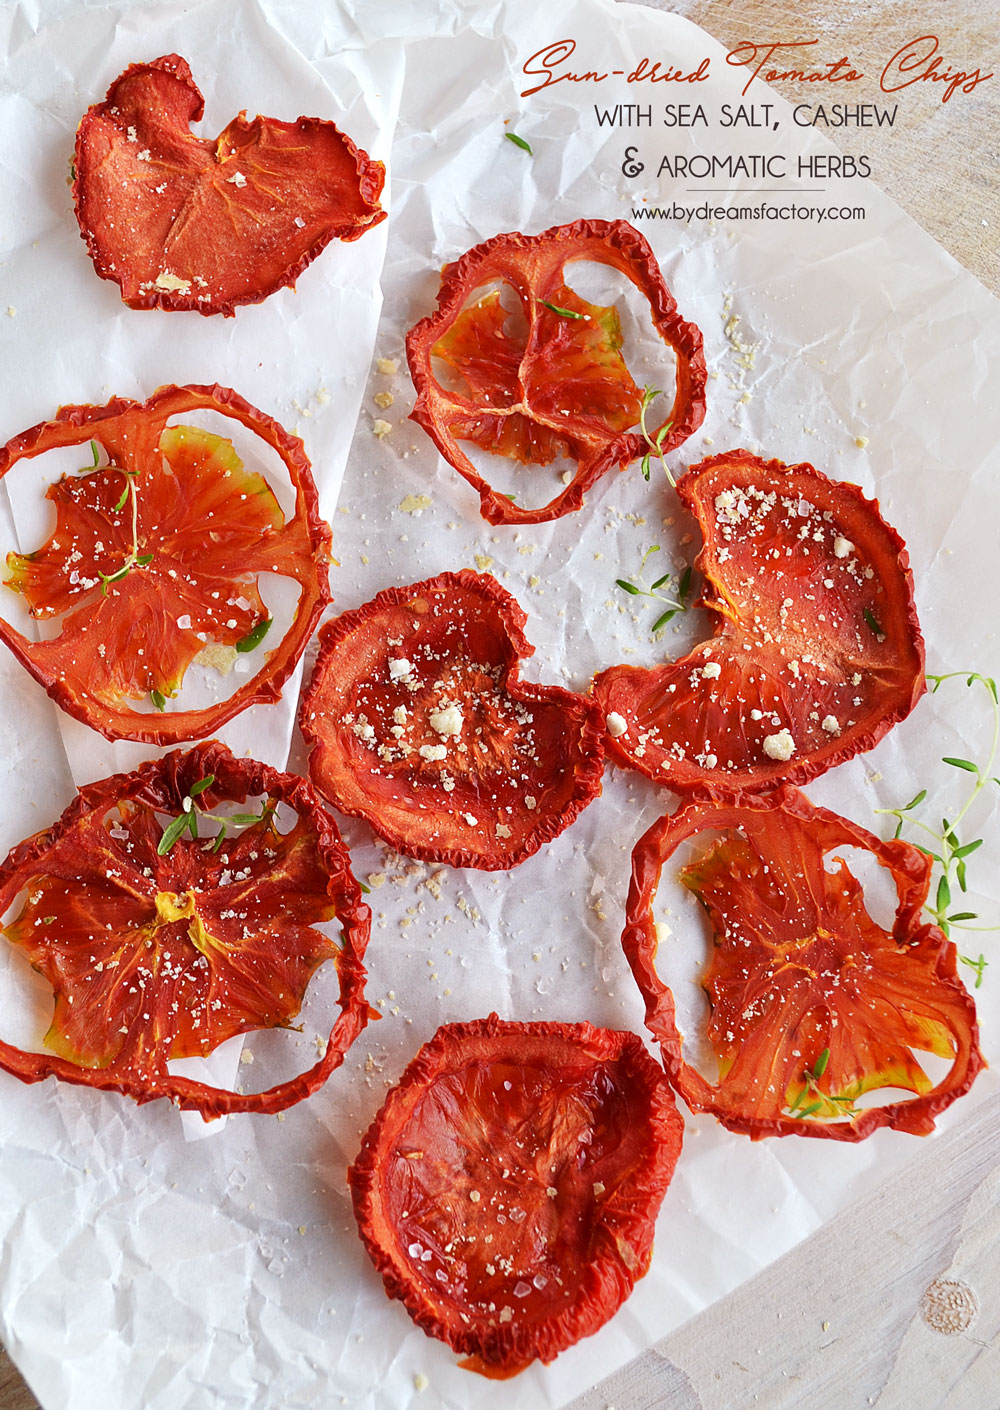 Sun-dried tomato chips with sea salt, cashew and herbs - www.bydreamsfactory.com